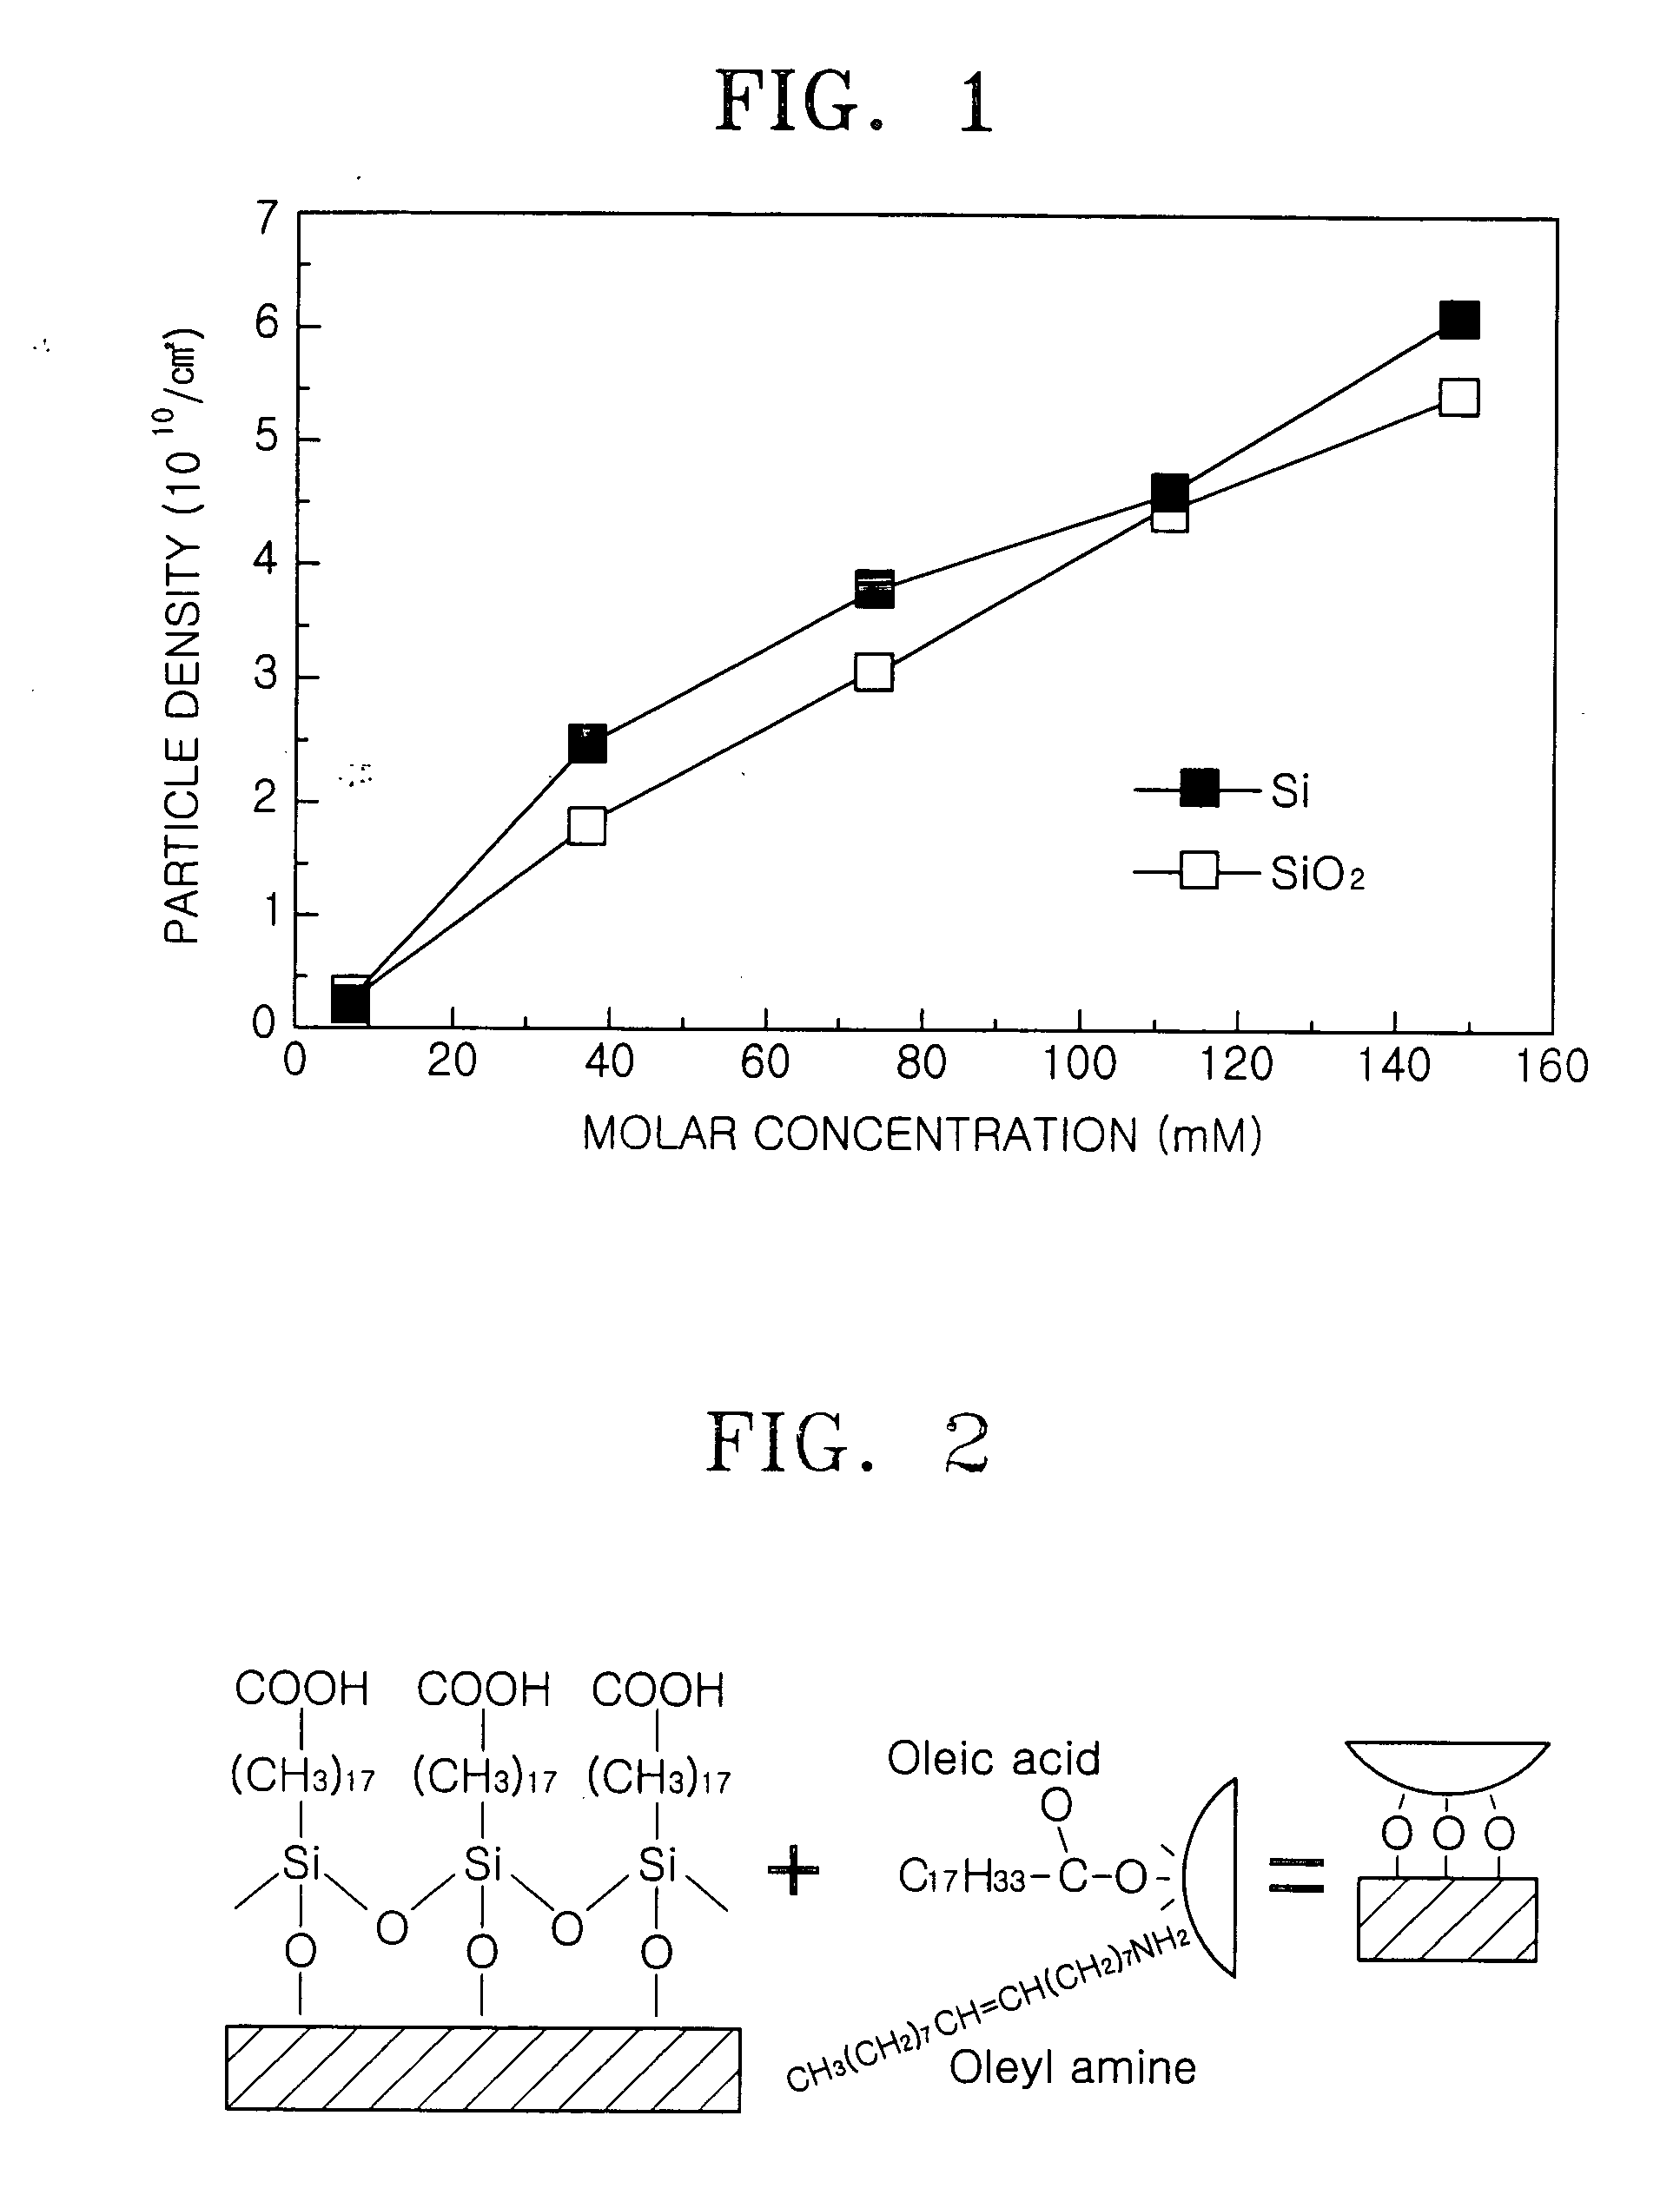 Methods of forming nanoparticle based monolayer films with high particle density and devices including the same